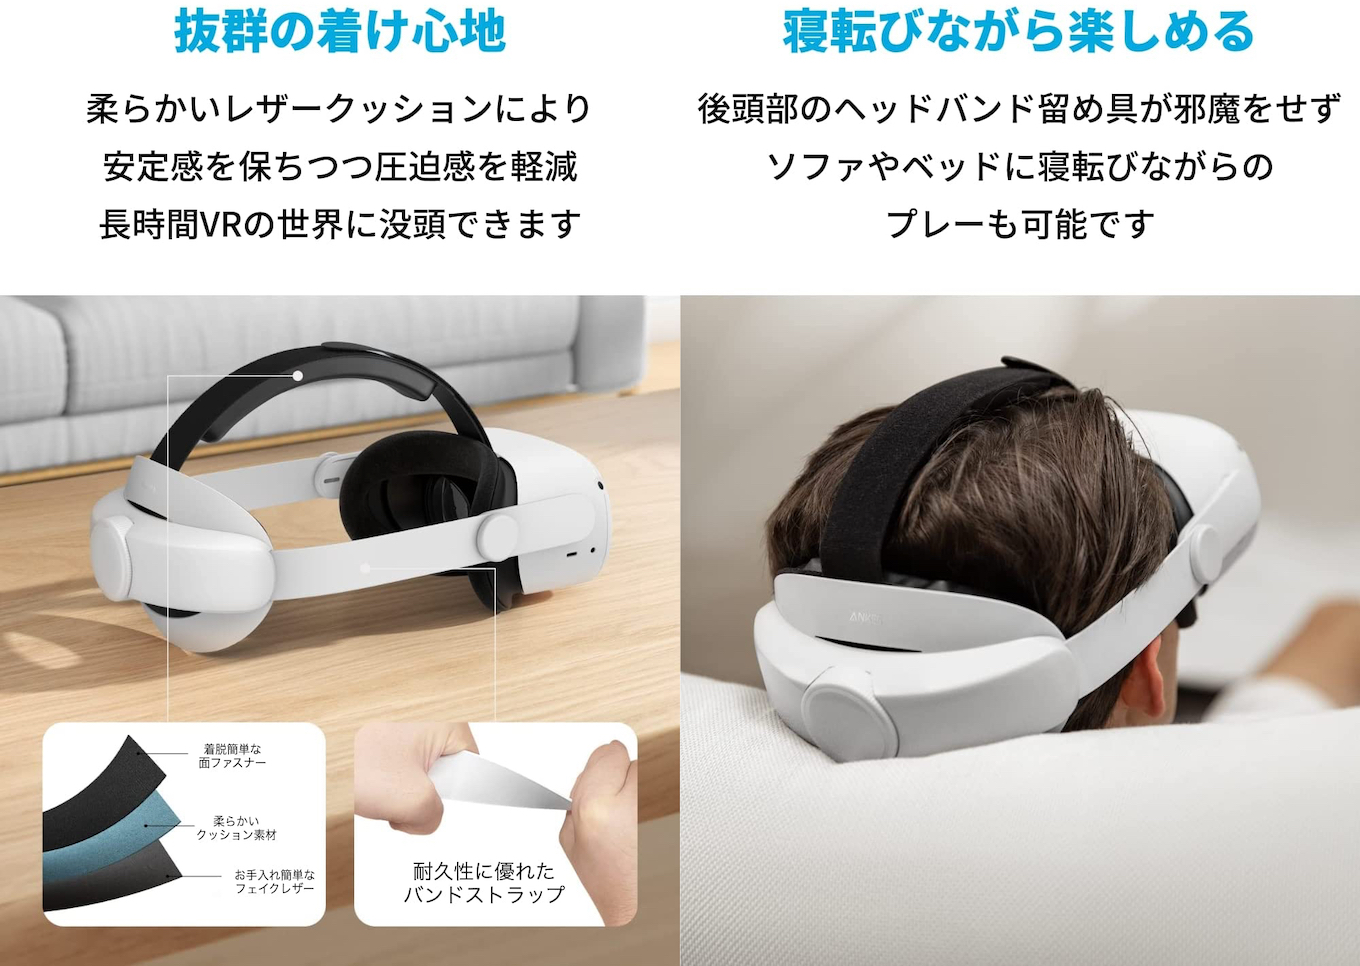 Anker Head Strap for Oculus Quest 2の機能